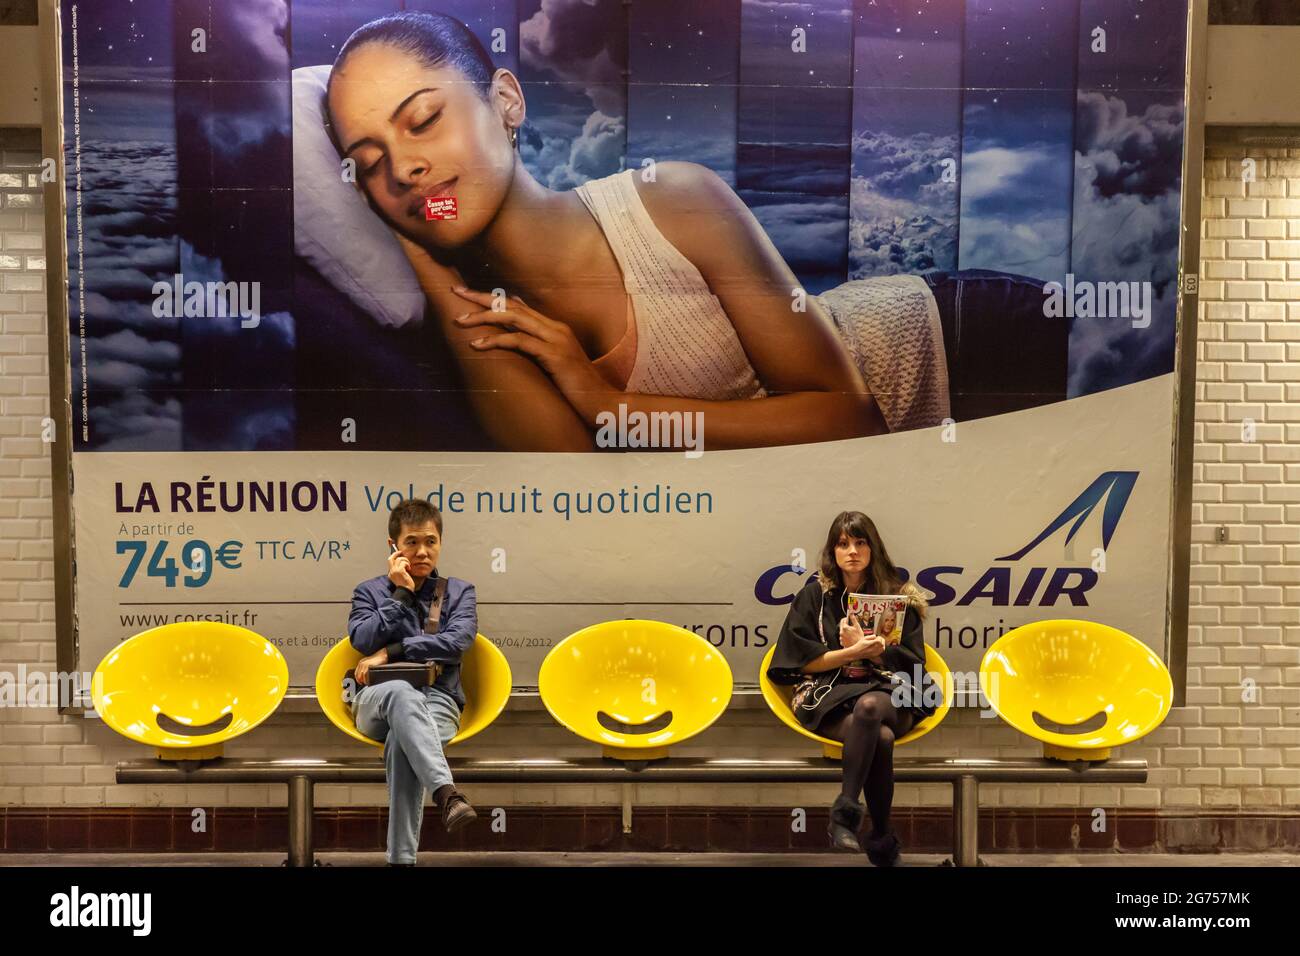 Two people seated in a Parisian metro station. Yellow seats, advertising poster in the background. Stock Photo